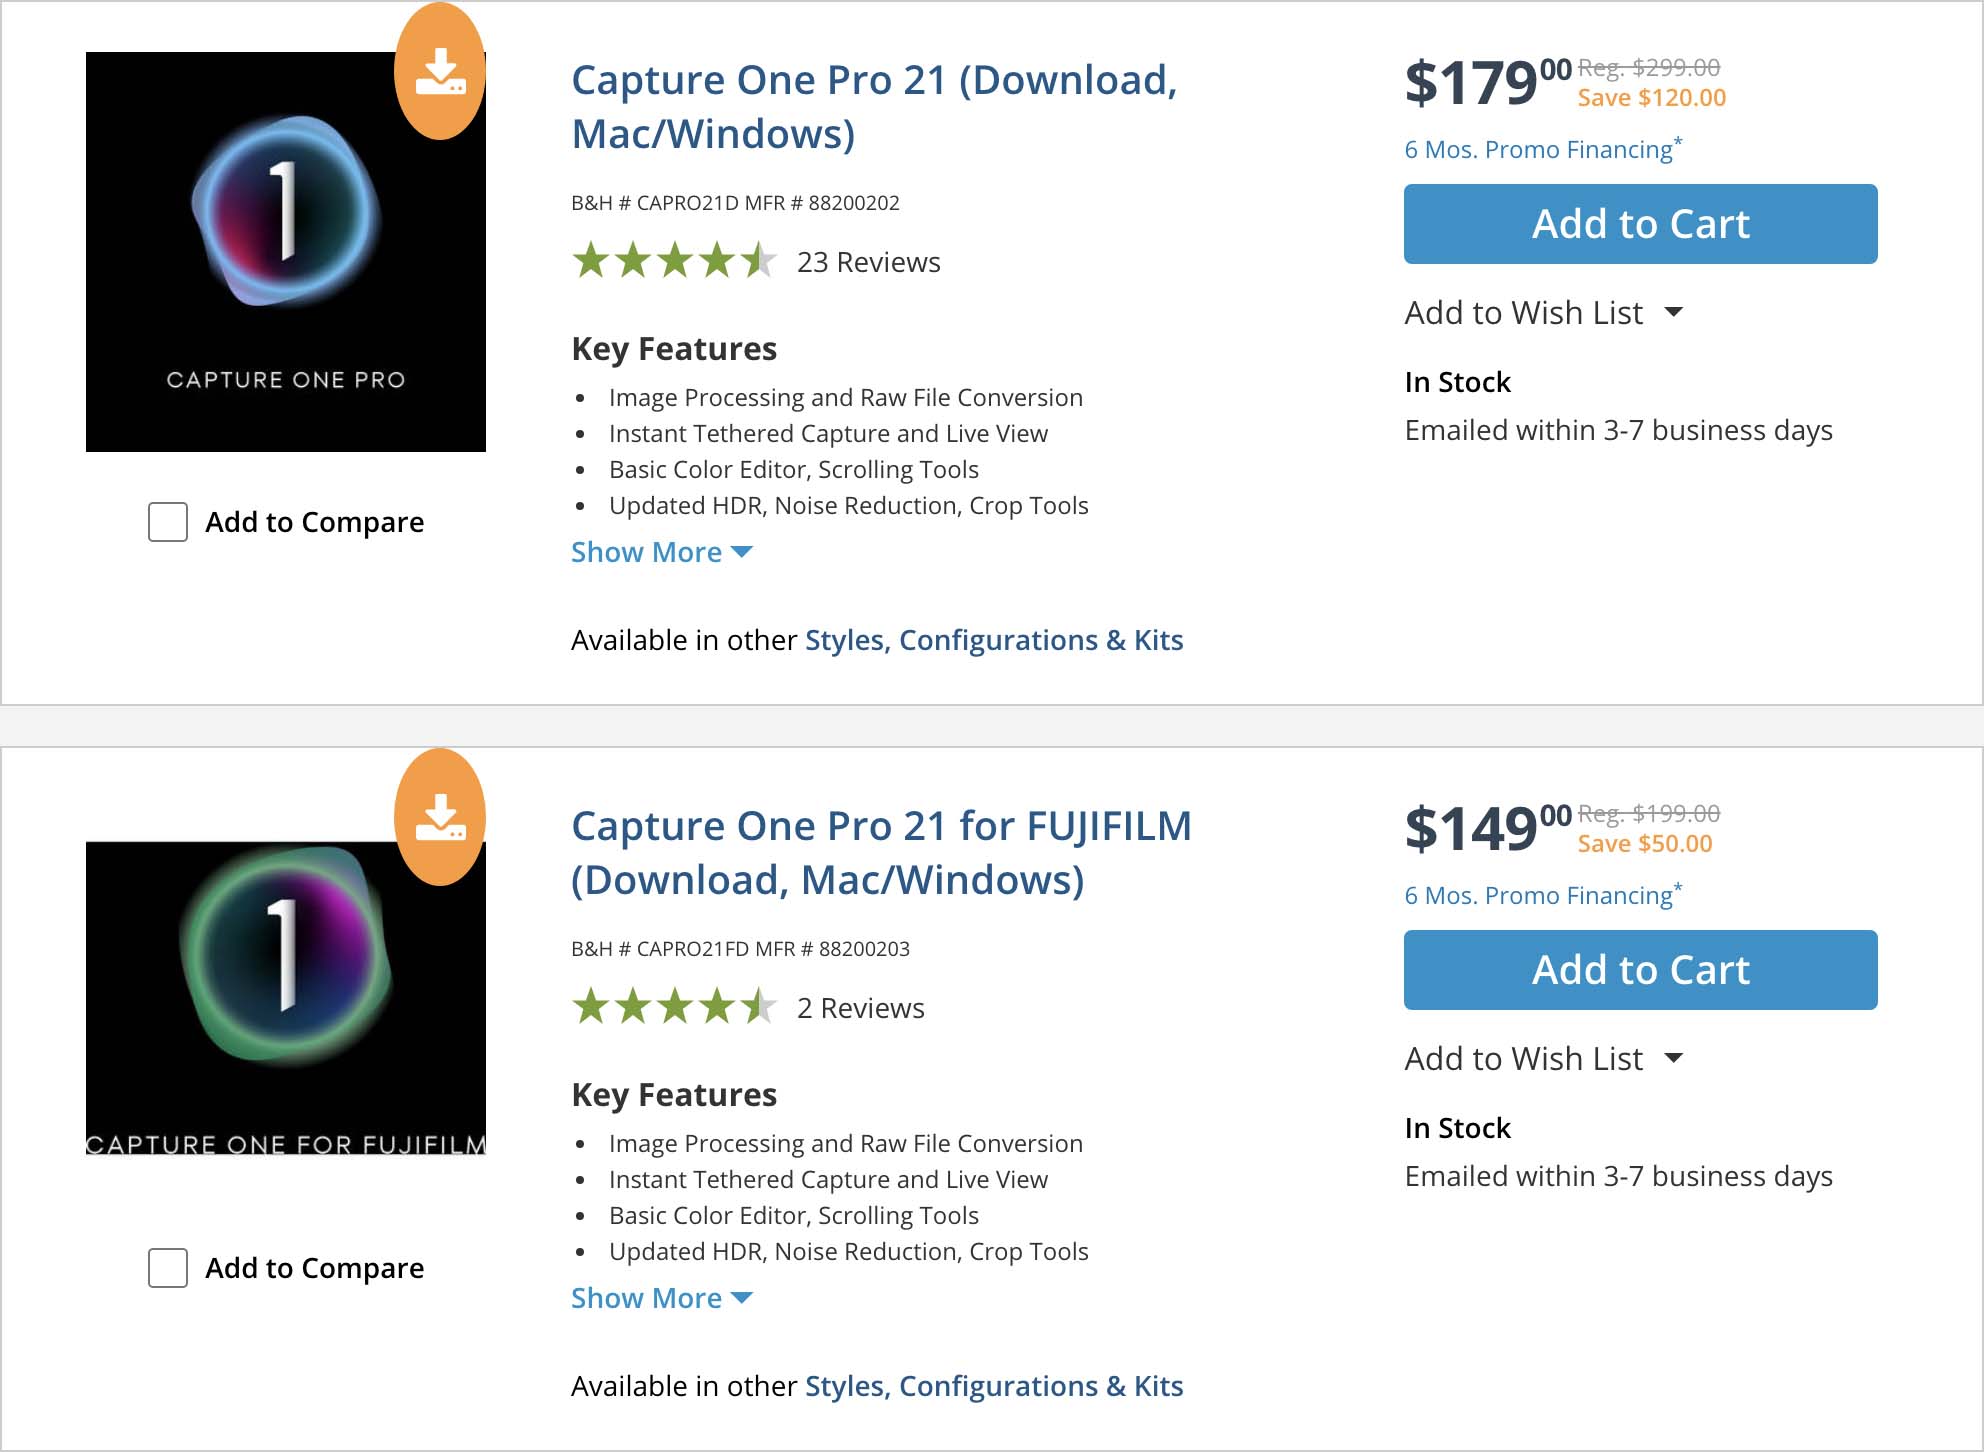 new-capture-one-pro-21-discounts-with-free-capture-one-pro-22-upgrade